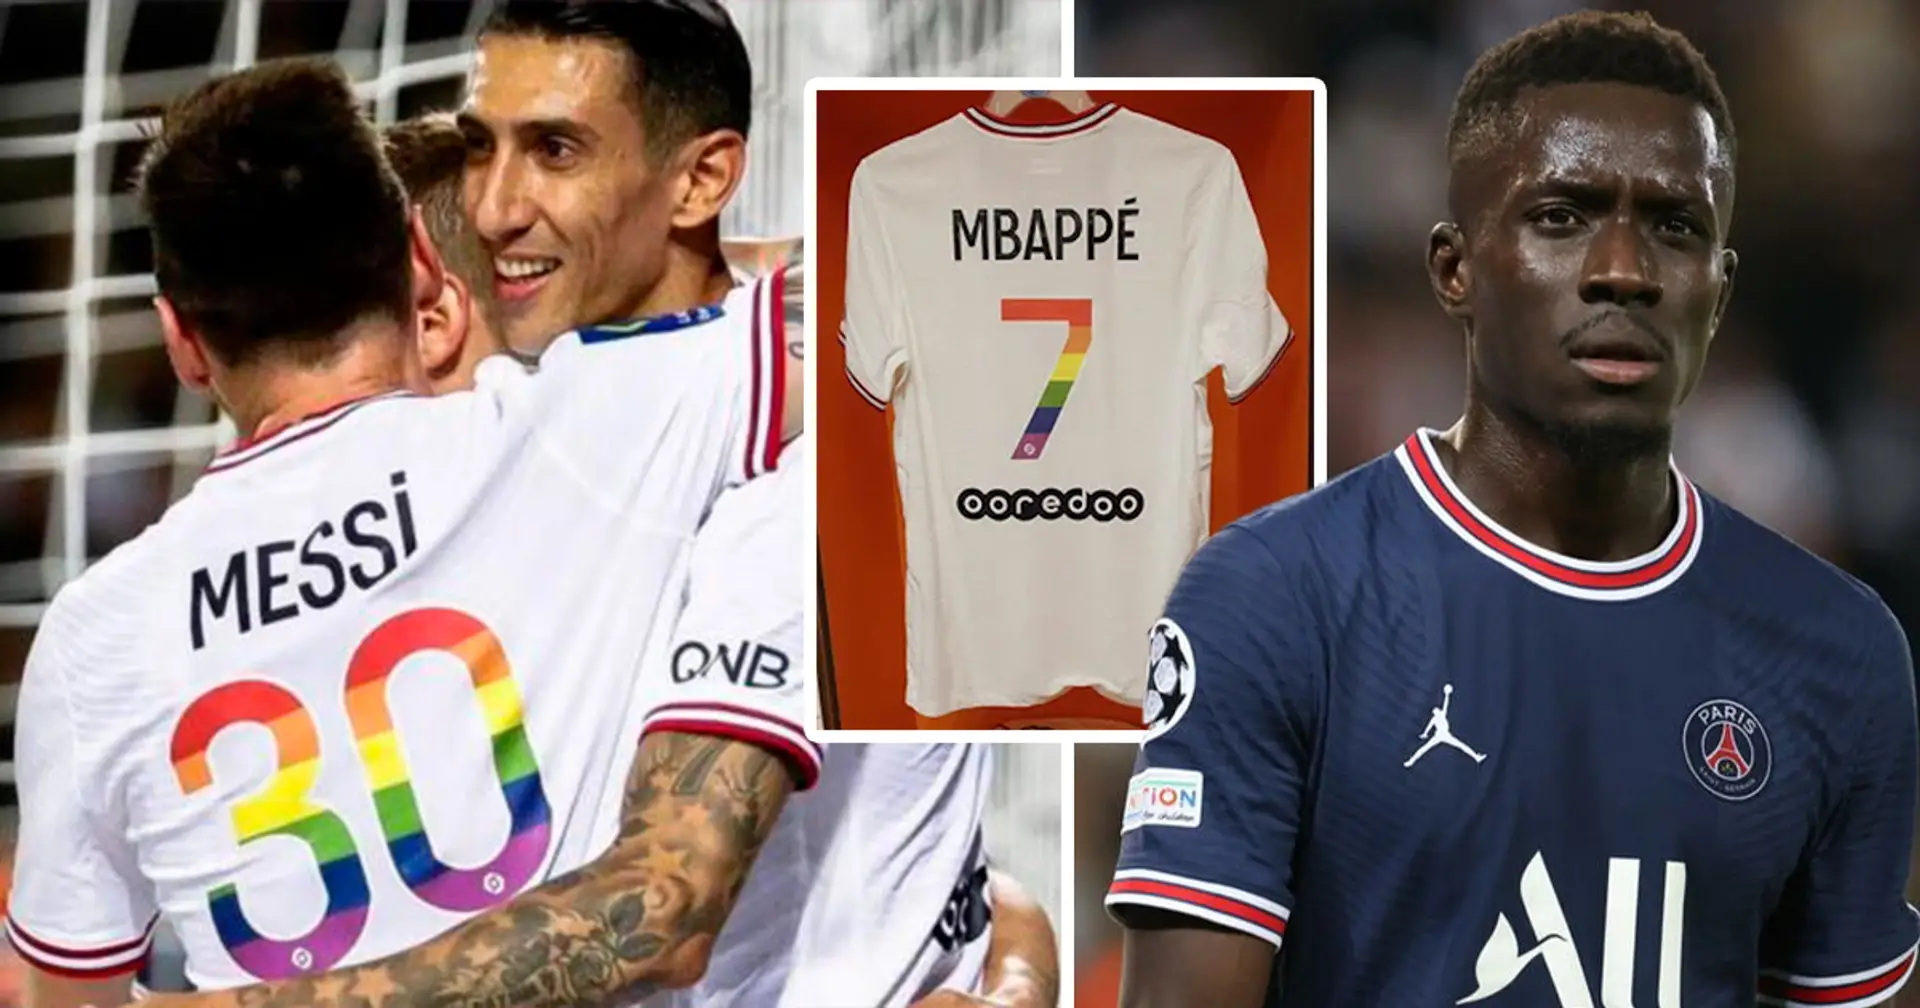 'We're not asking them to march at Gay Pride. It's just a sign to fight homophobia': Marseille captain Rongier on players refusing to wear rainbow jerseys